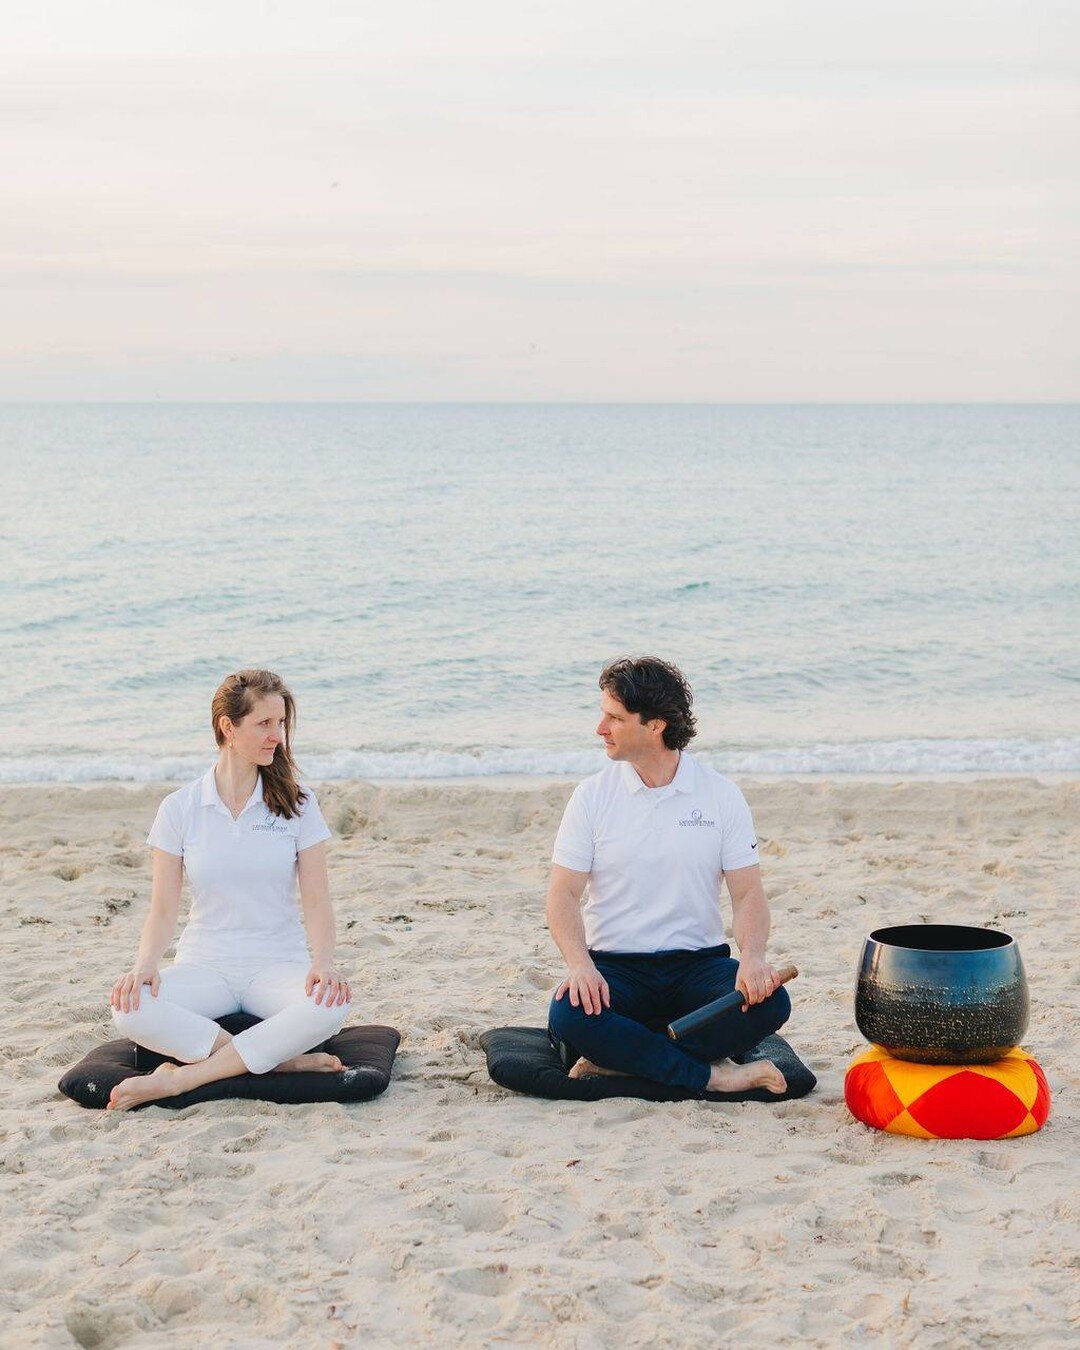 Nantucket is known for its romantic dining enclaves but there are so many spots to connect with your partner for free on the mat. Let us know if you&rsquo;d like guidance! We&rsquo;ll bring the singing bowl + cushions.